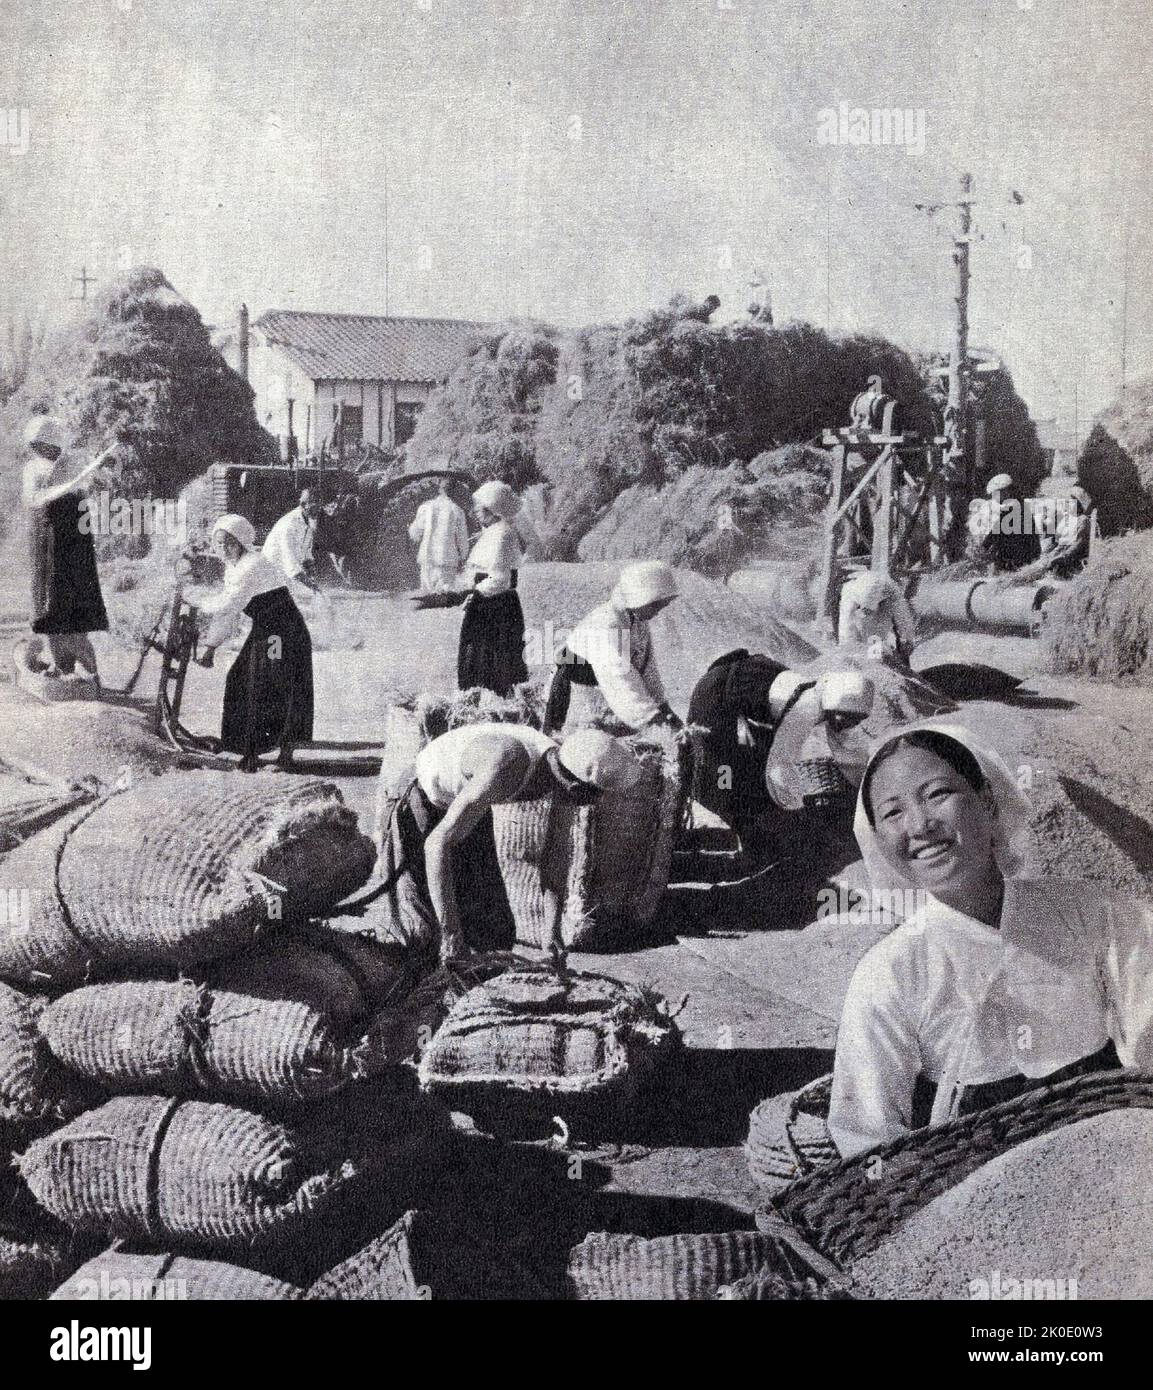 Rice workers on a communist collective farm in North Korea, 1961. Stock Photo